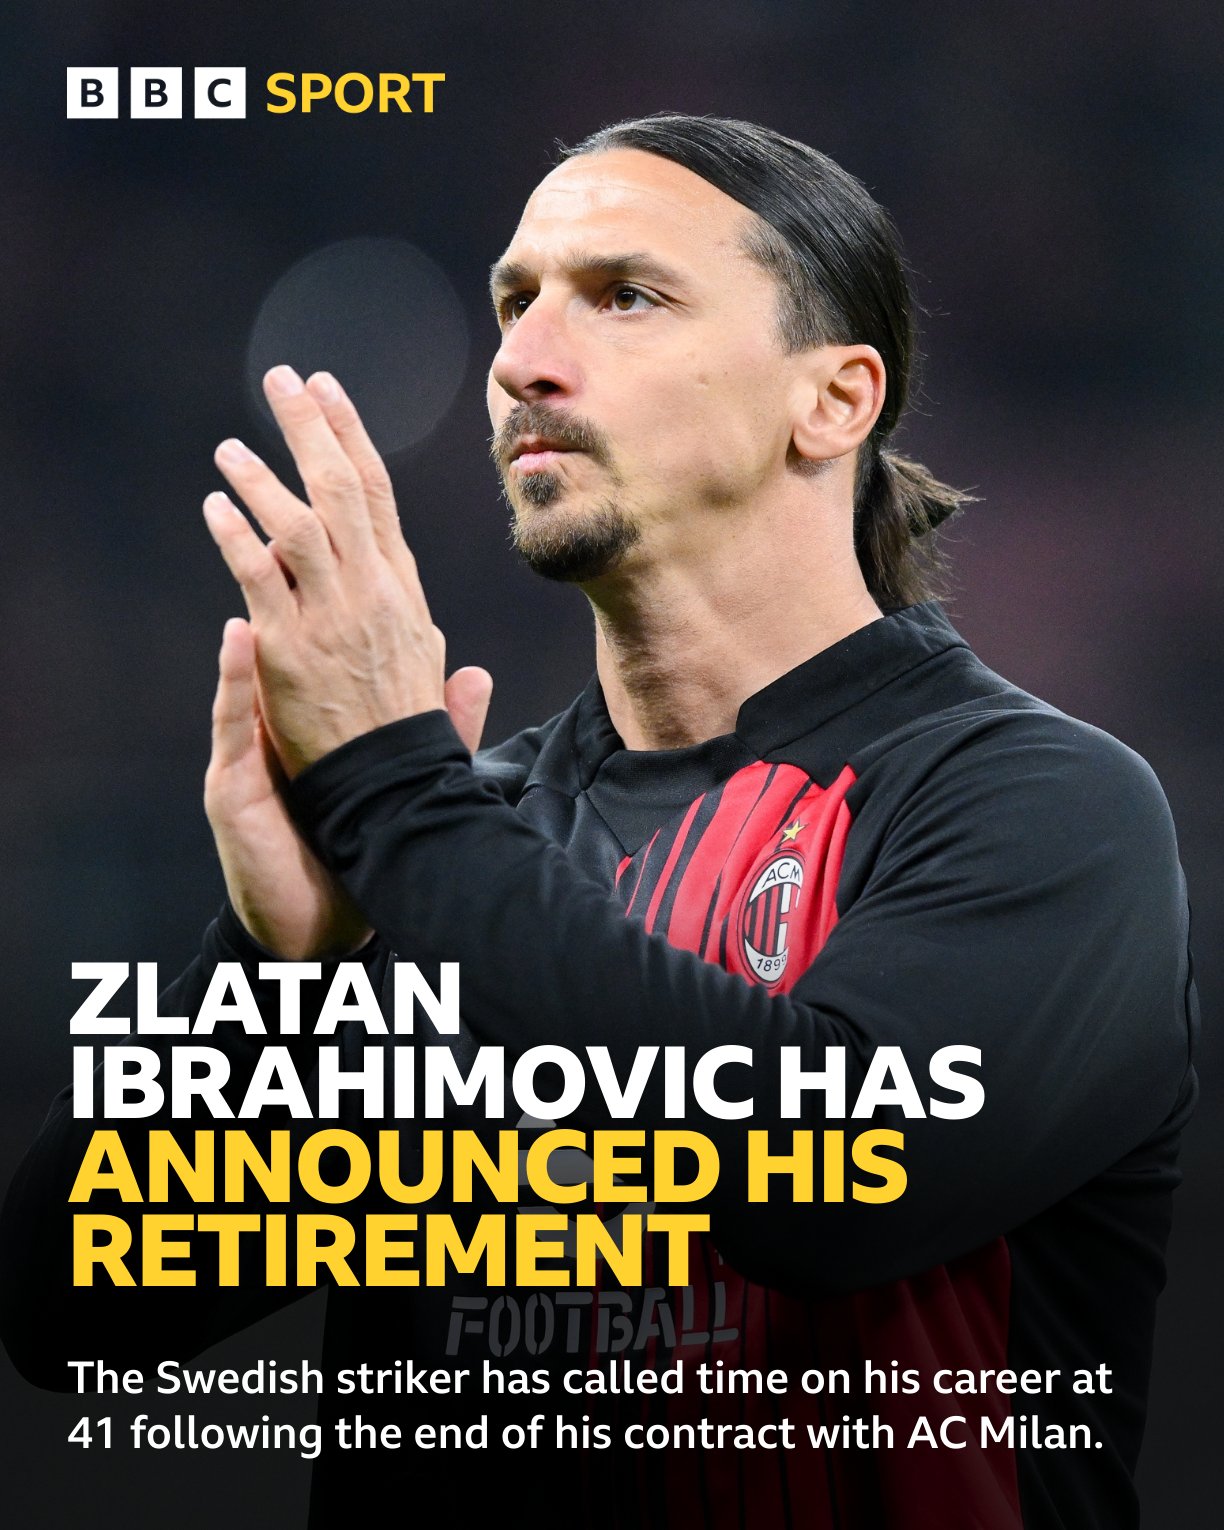 There is only one Zlatan